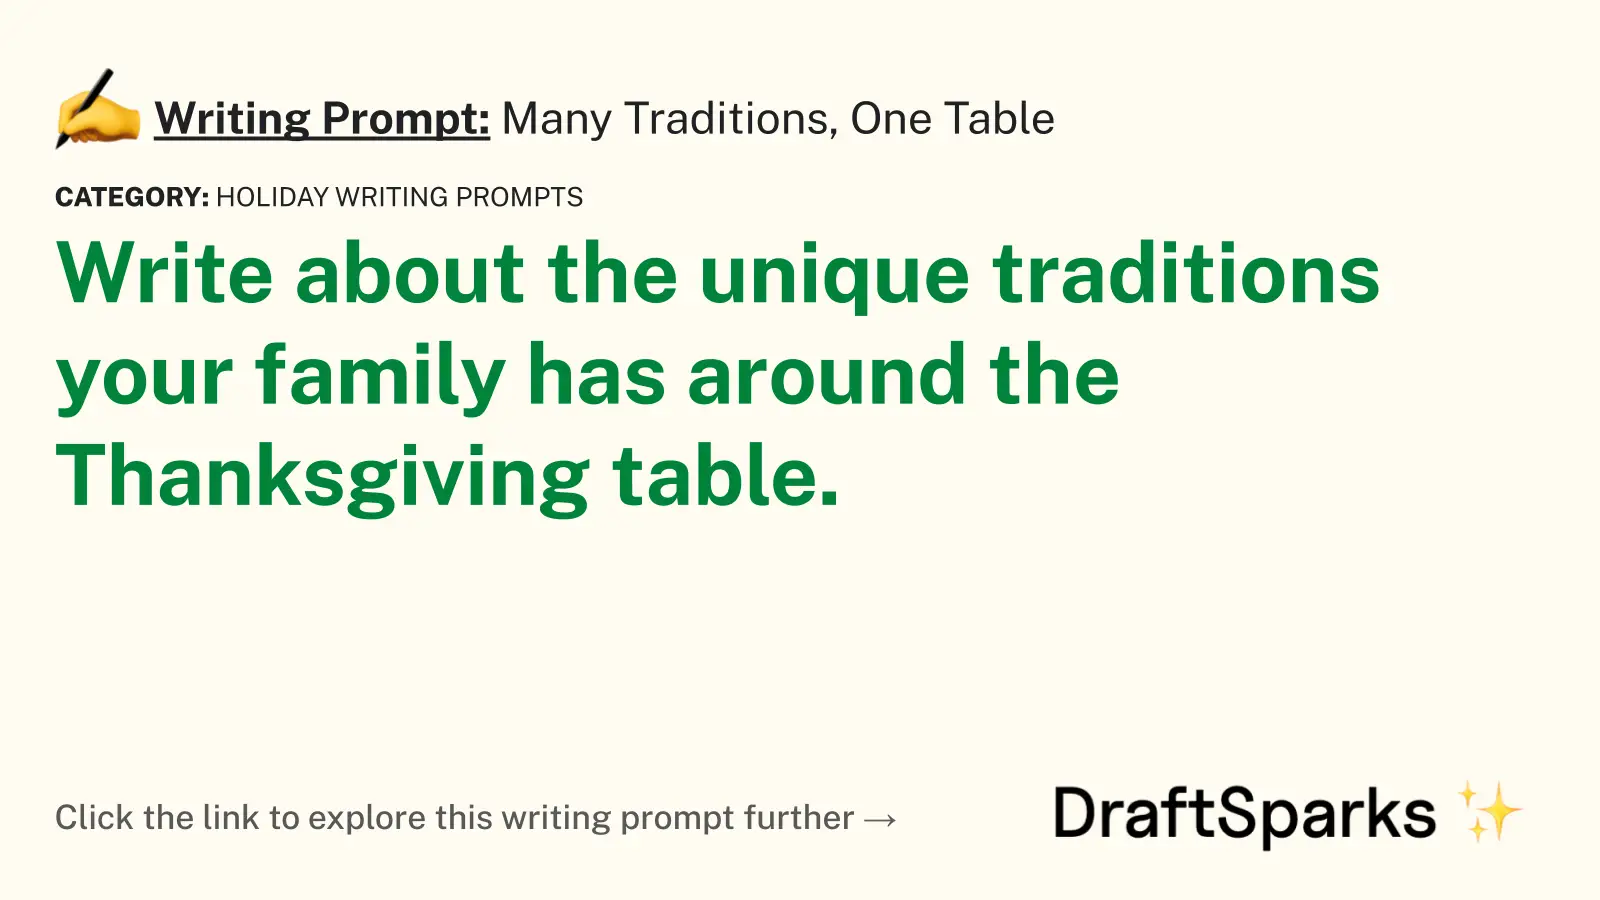 Many Traditions, One Table